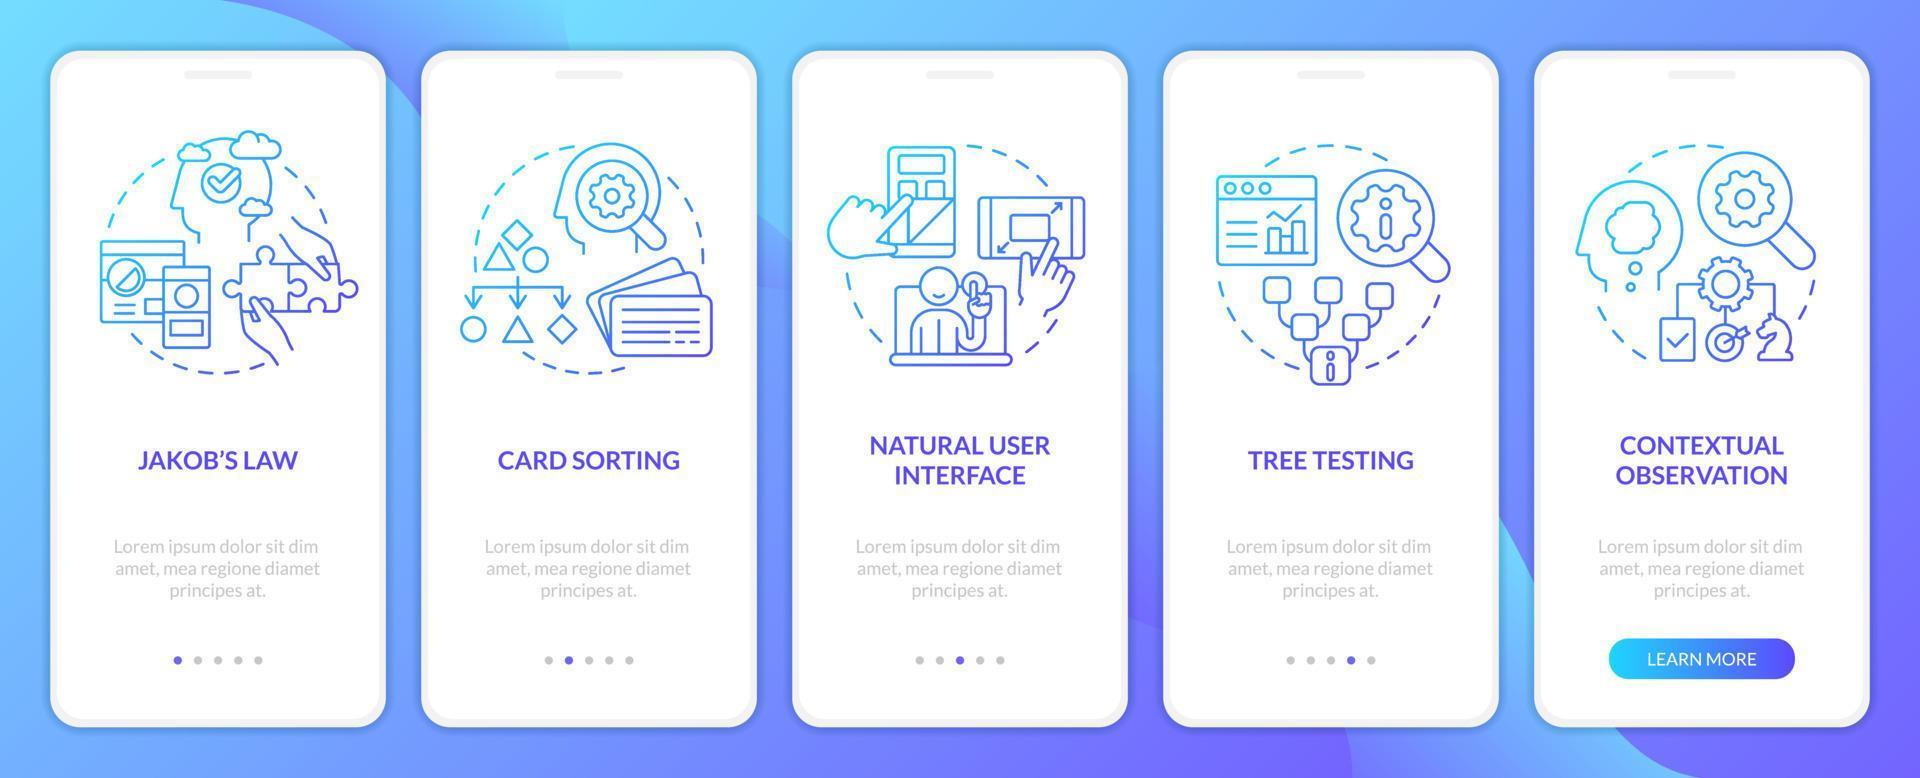 Leveraging mental models in design blue gradient onboarding mobile app screen. Walkthrough 5 steps graphic instructions with linear concepts. UI, UX, GUI template vector